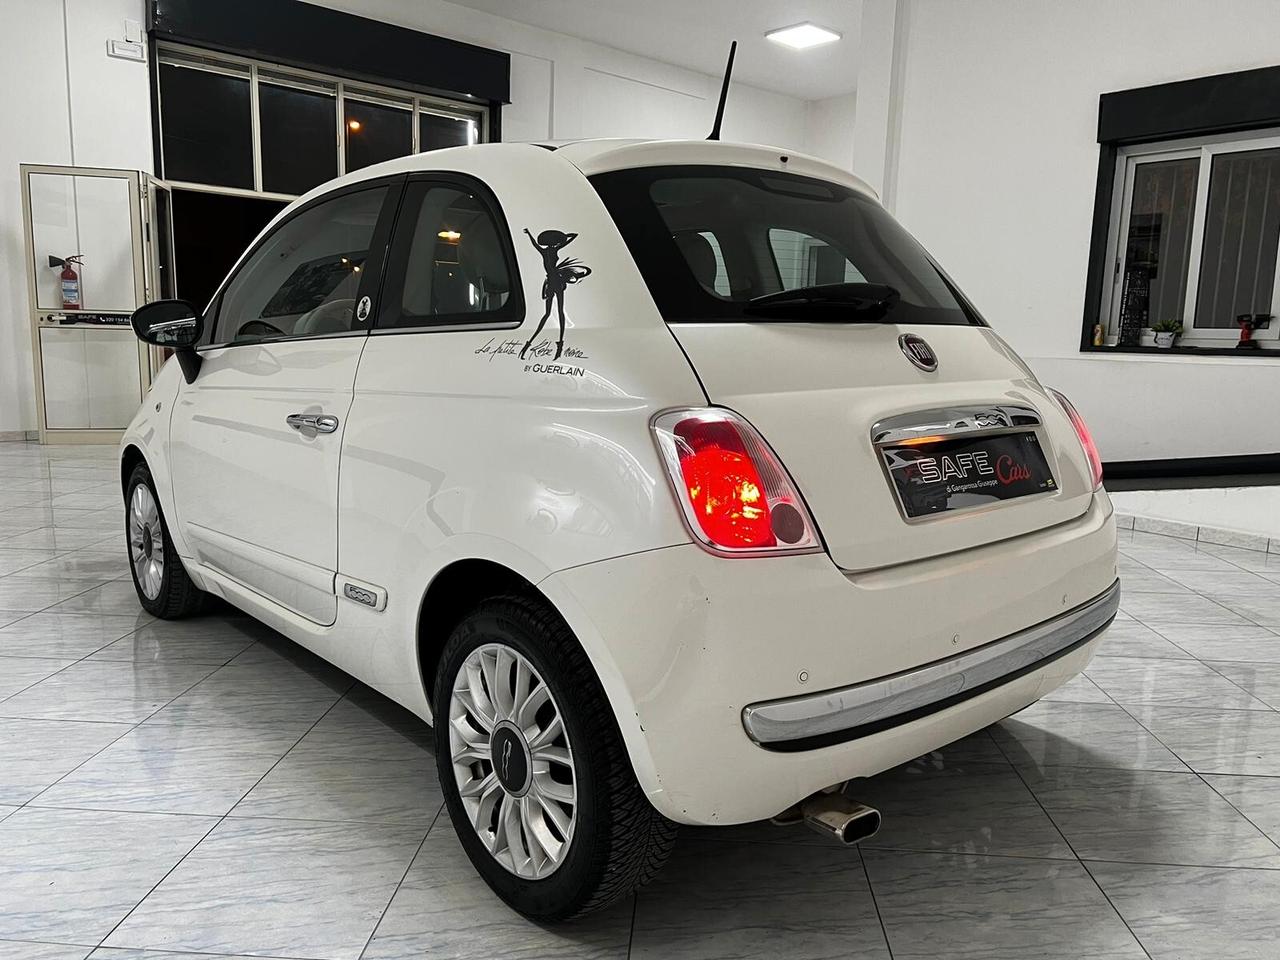 Fiat 500 1.2 Lounge limited edition BY GUERLAN